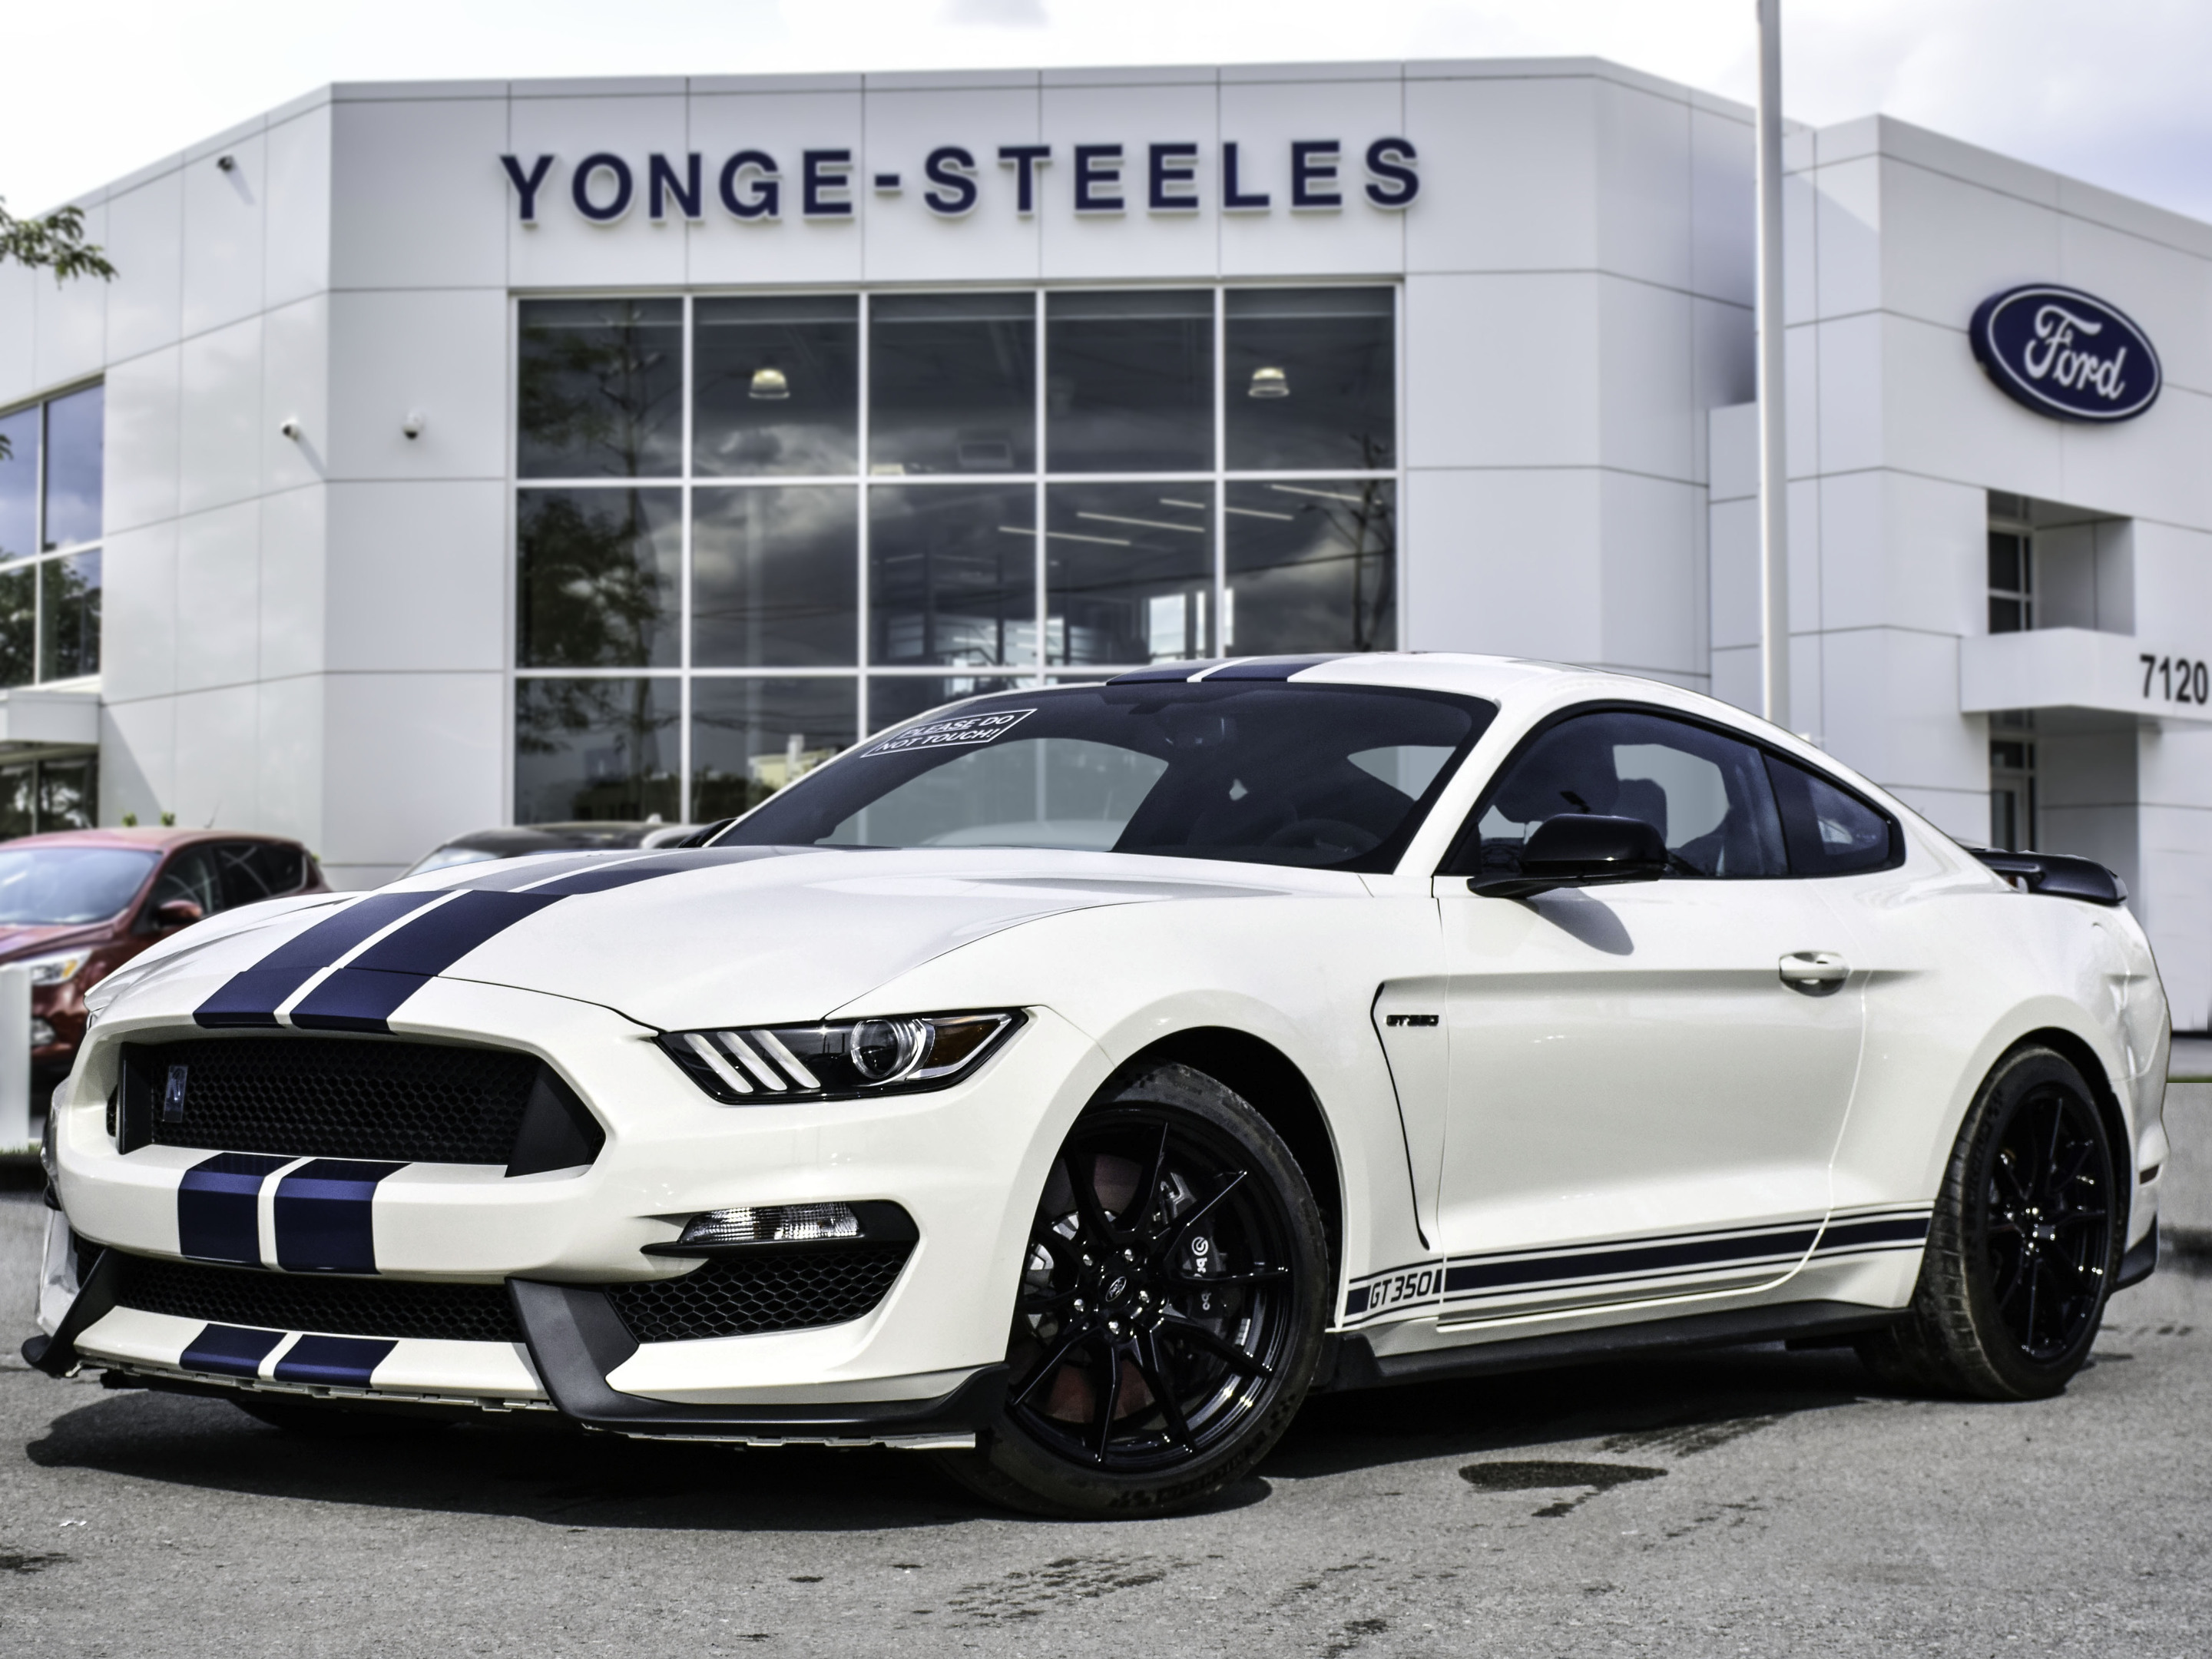 2020 Ford Mustang SHELBY GT 350 HERITAGE EDITION LAST YEAR 350 RARE!